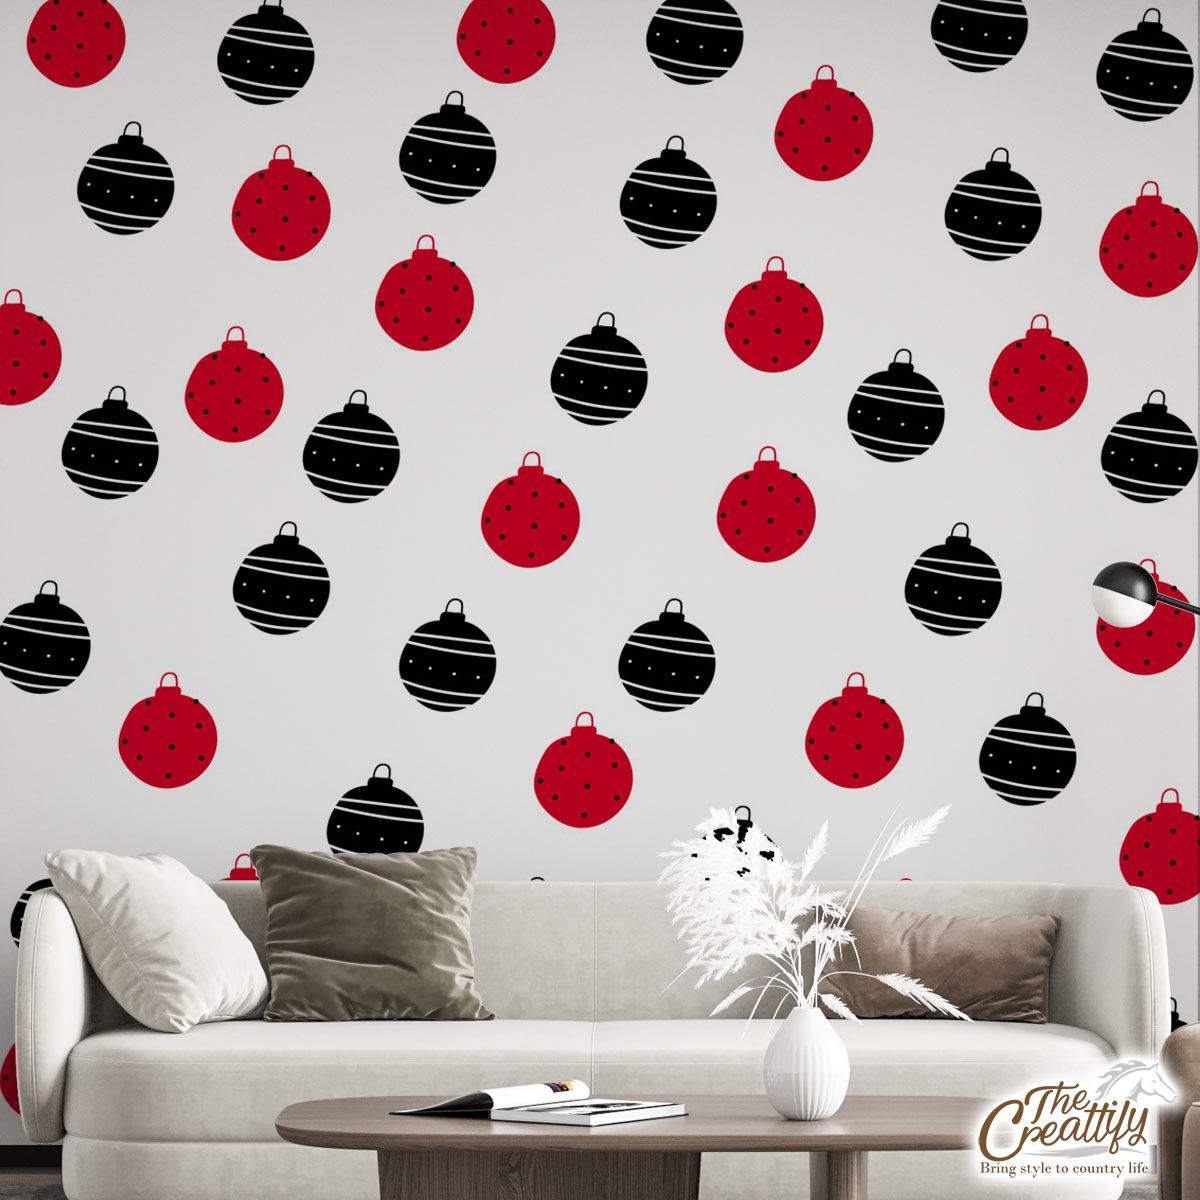 Hand Drawn Black and Red Christmas Balls Seamless Pattern Wall Mural